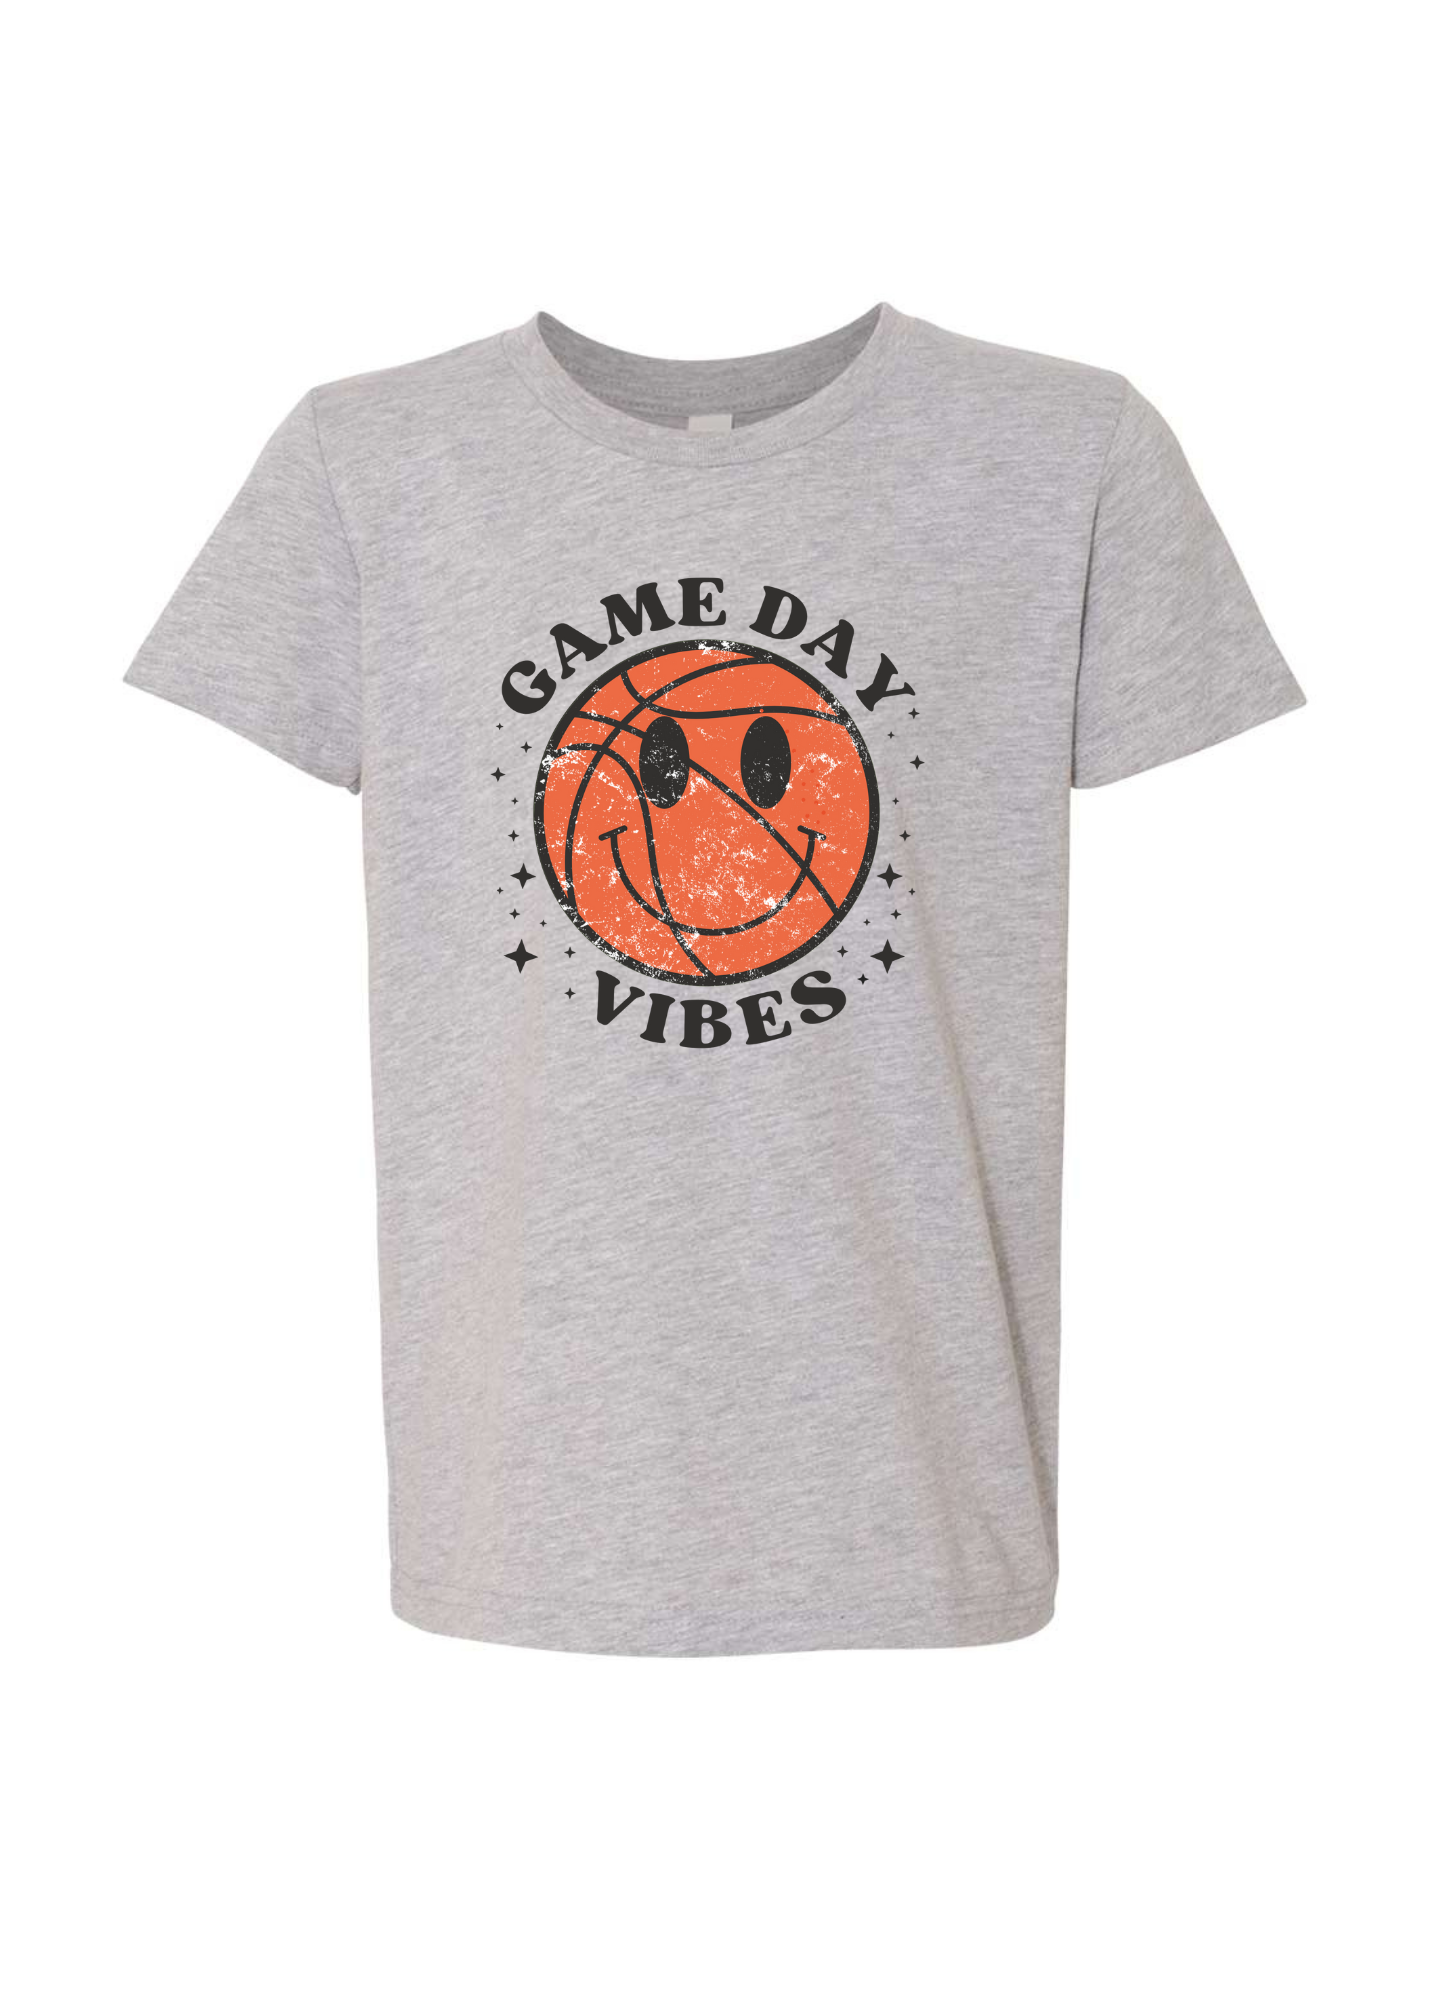 Game Day Vibes Basketball | Tee | Kids-Sister Shirts-Sister Shirts, Cute & Custom Tees for Mama & Littles in Trussville, Alabama.